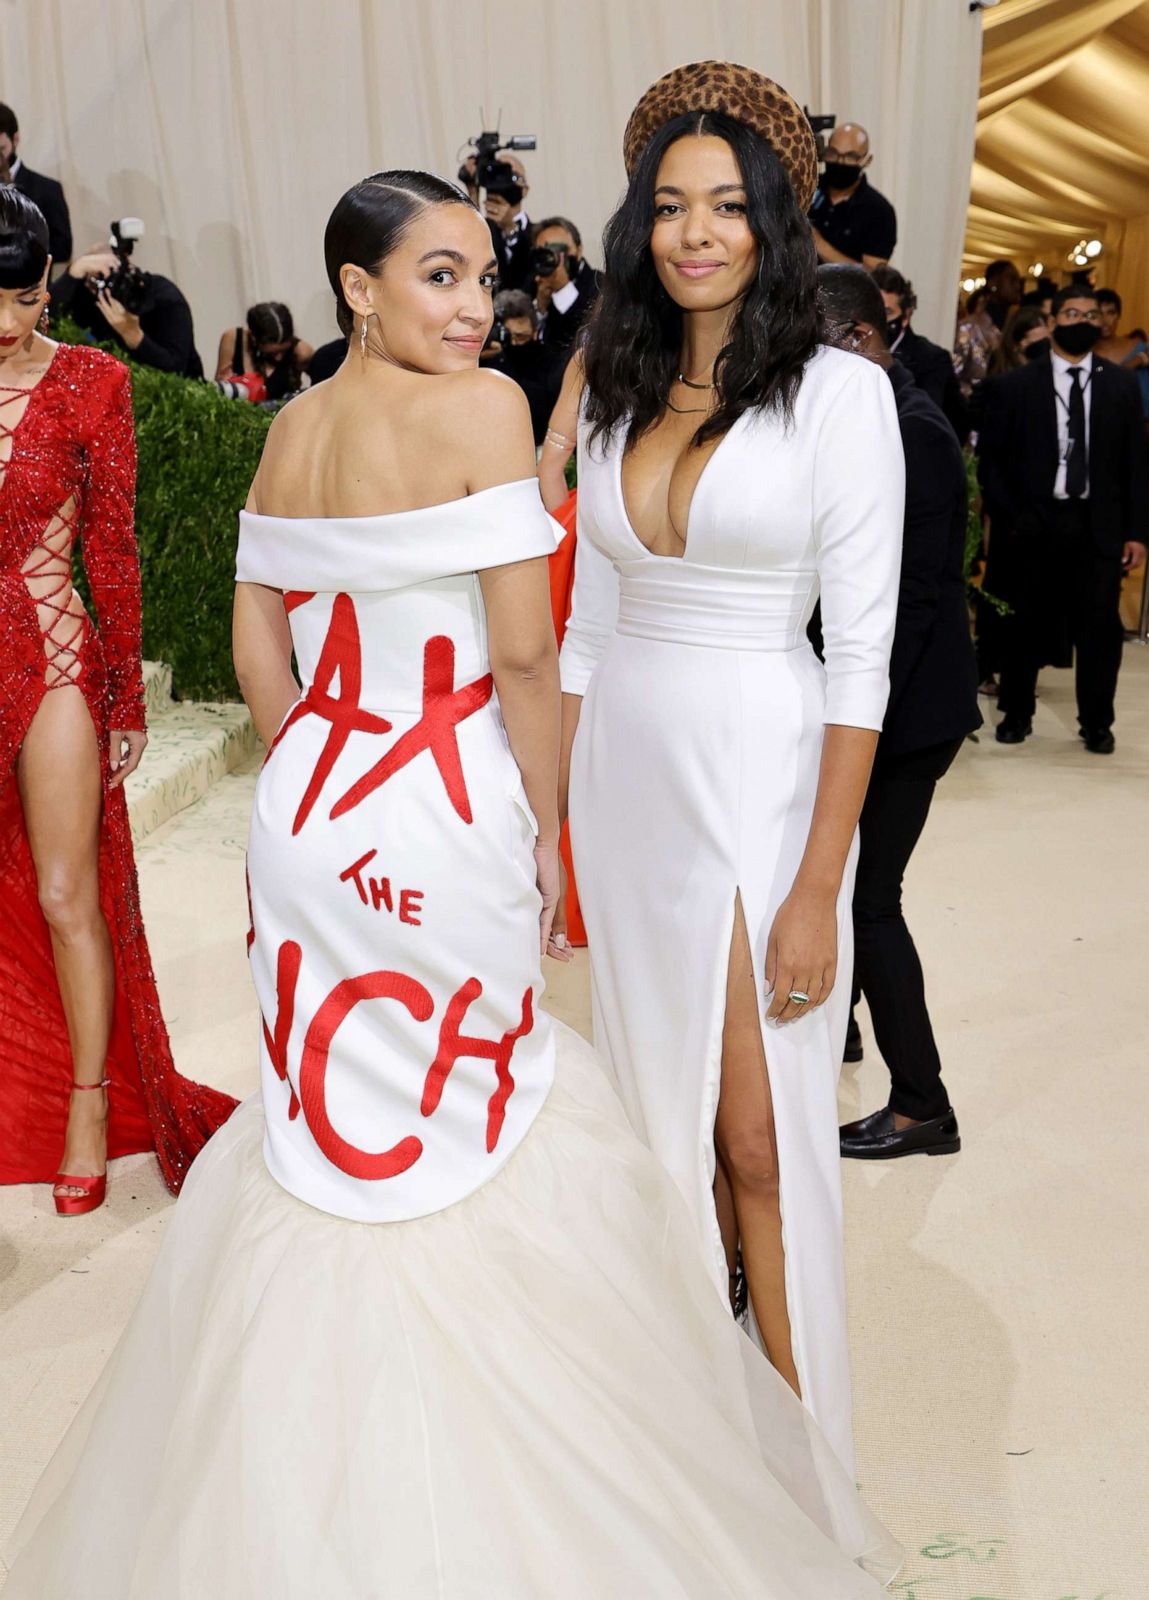 Best dressed at the 2021 Met Gala Photos - ABC News